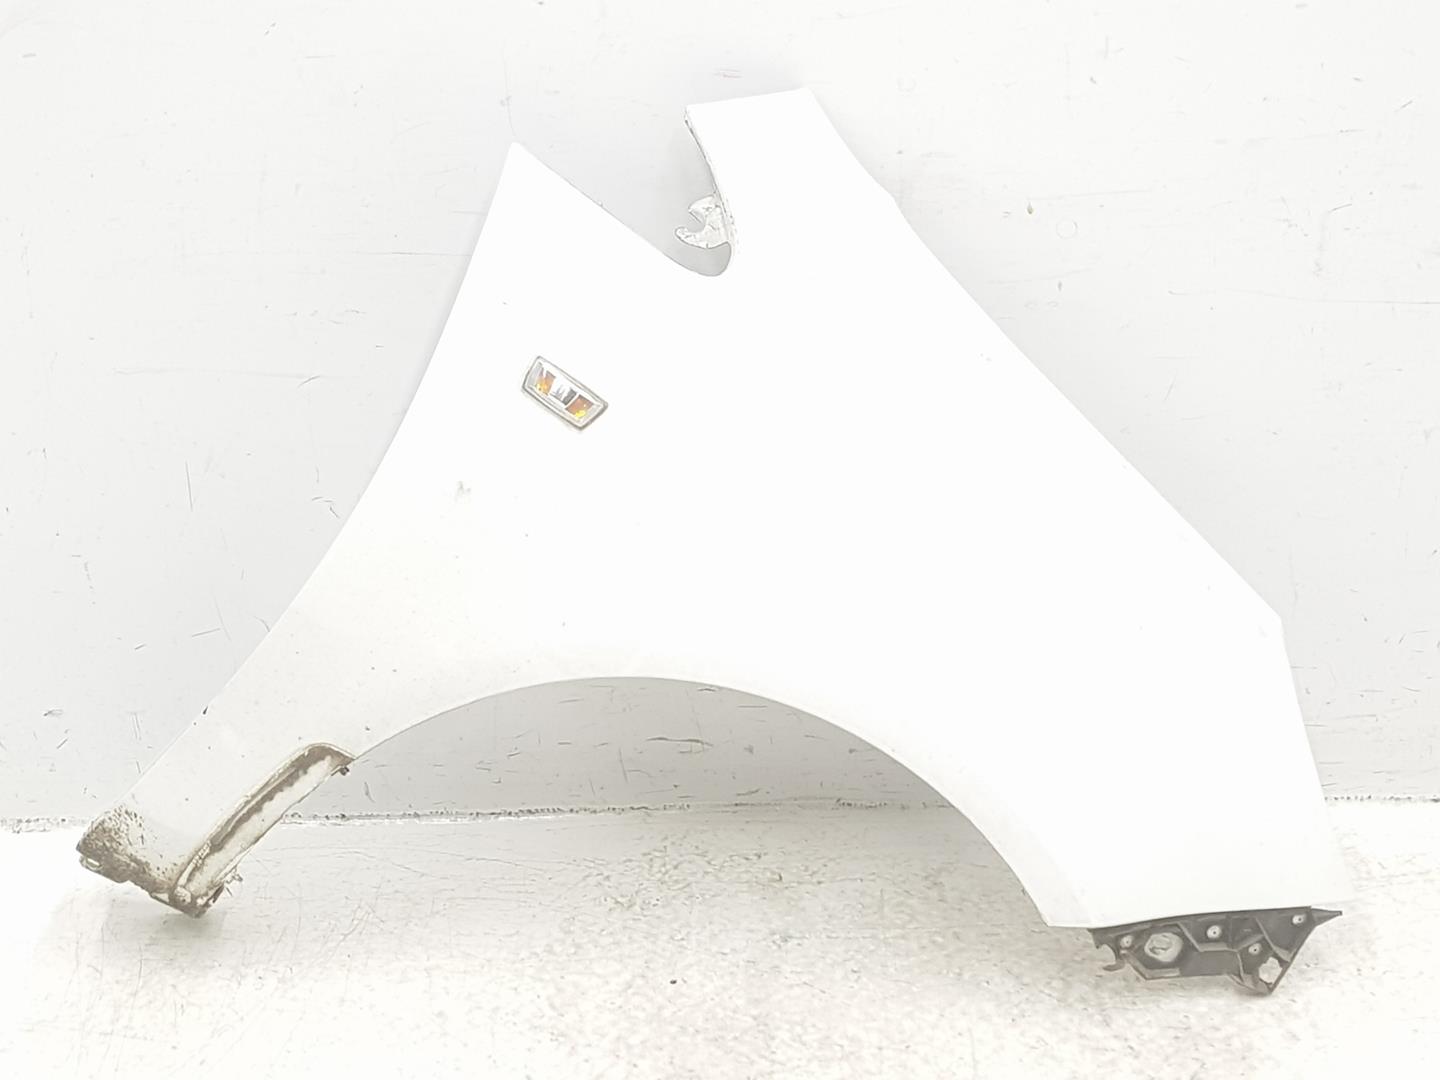 OPEL Corsa D (2006-2020) Front Right Fender 93189644, 93189644, COLORBLANCO10U(474) 24236408